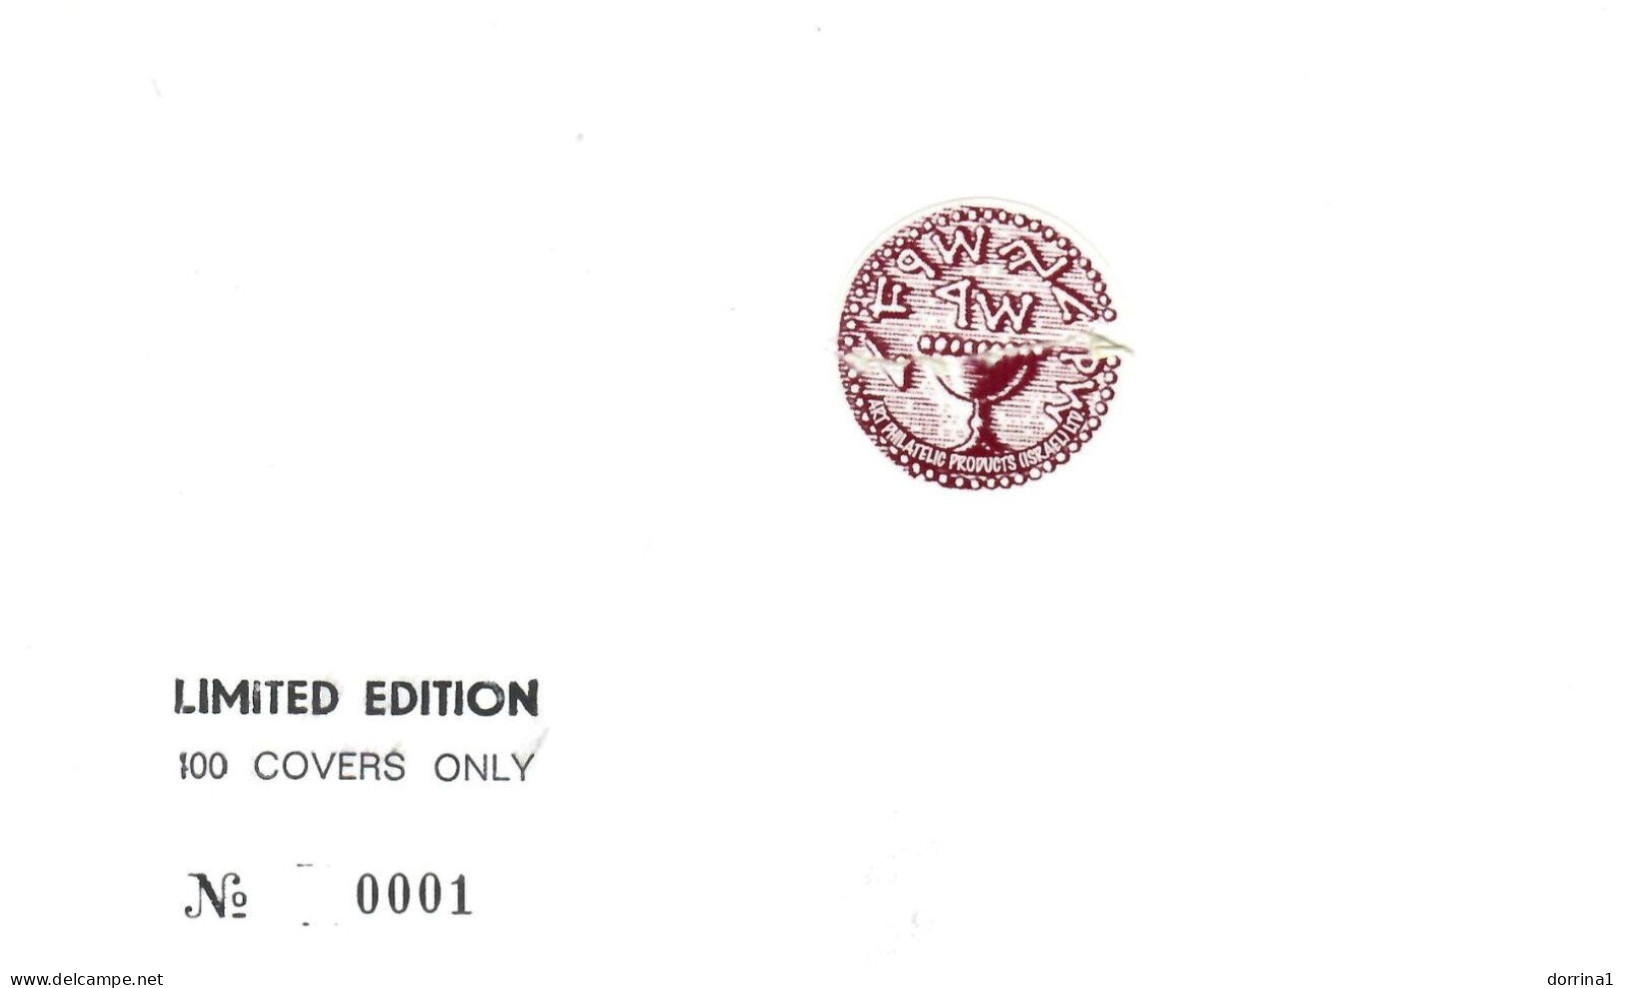 Israel Jerusalem 1995 Official Cover Stamp Exhibition Limited Edition Cover - Lettres & Documents